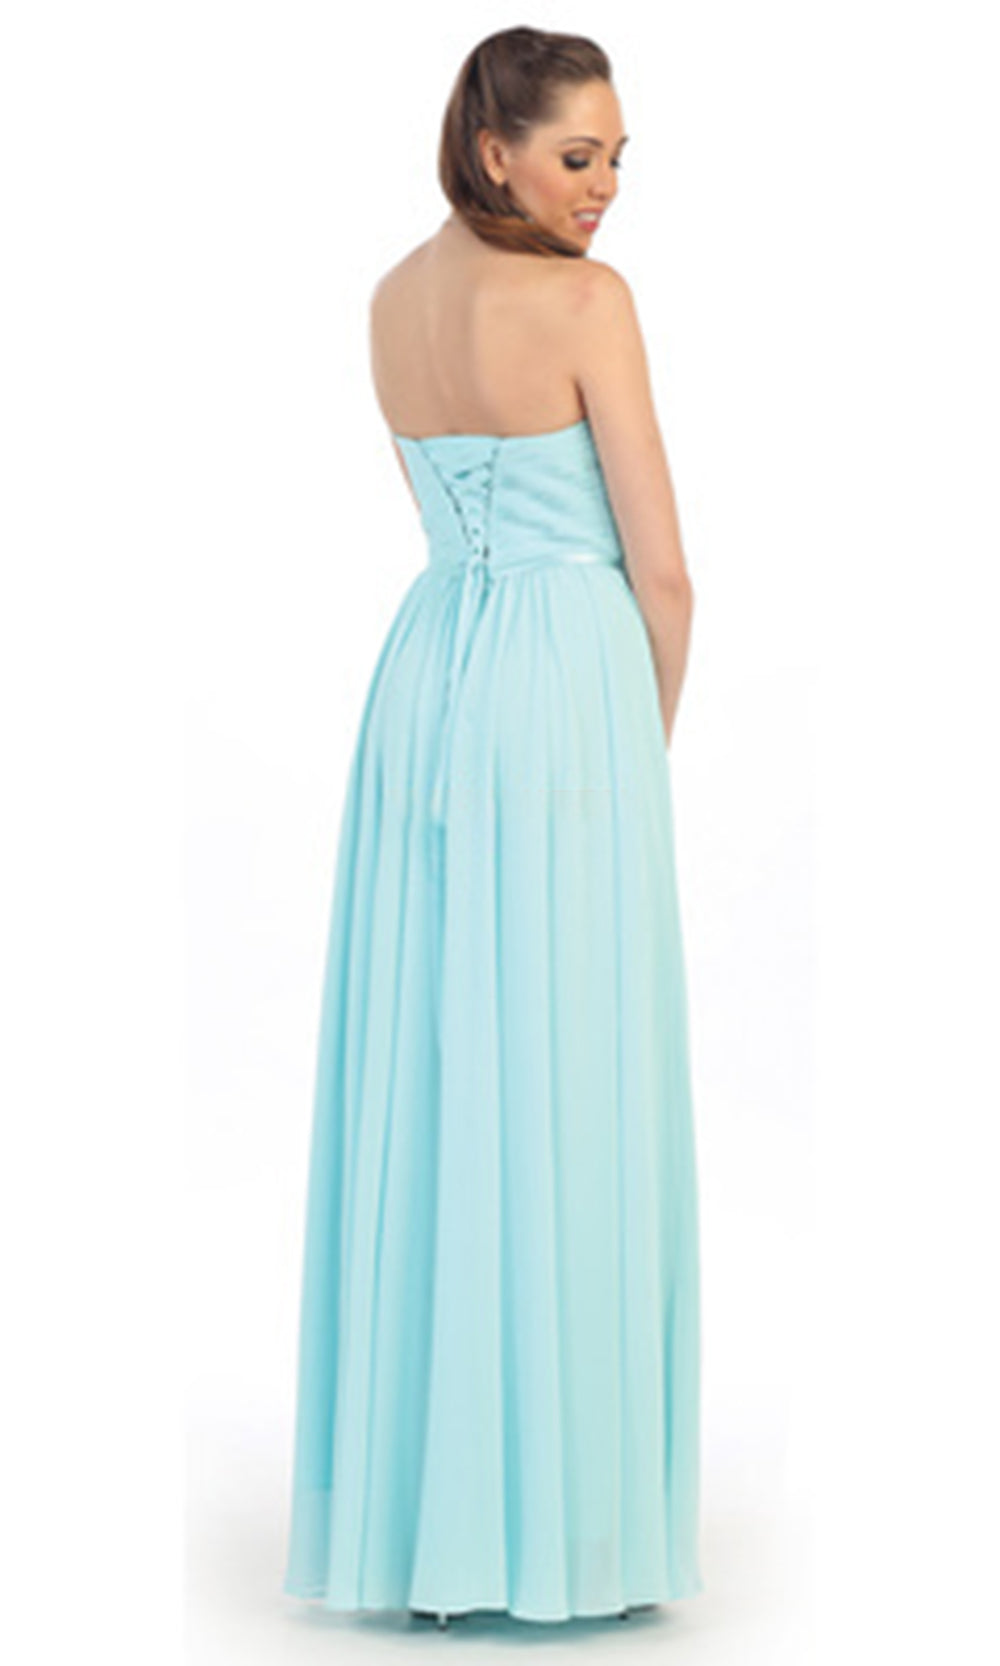 May Queen - MQ1145 Strapless Sweetheart A-Line Dress In Blue and Green